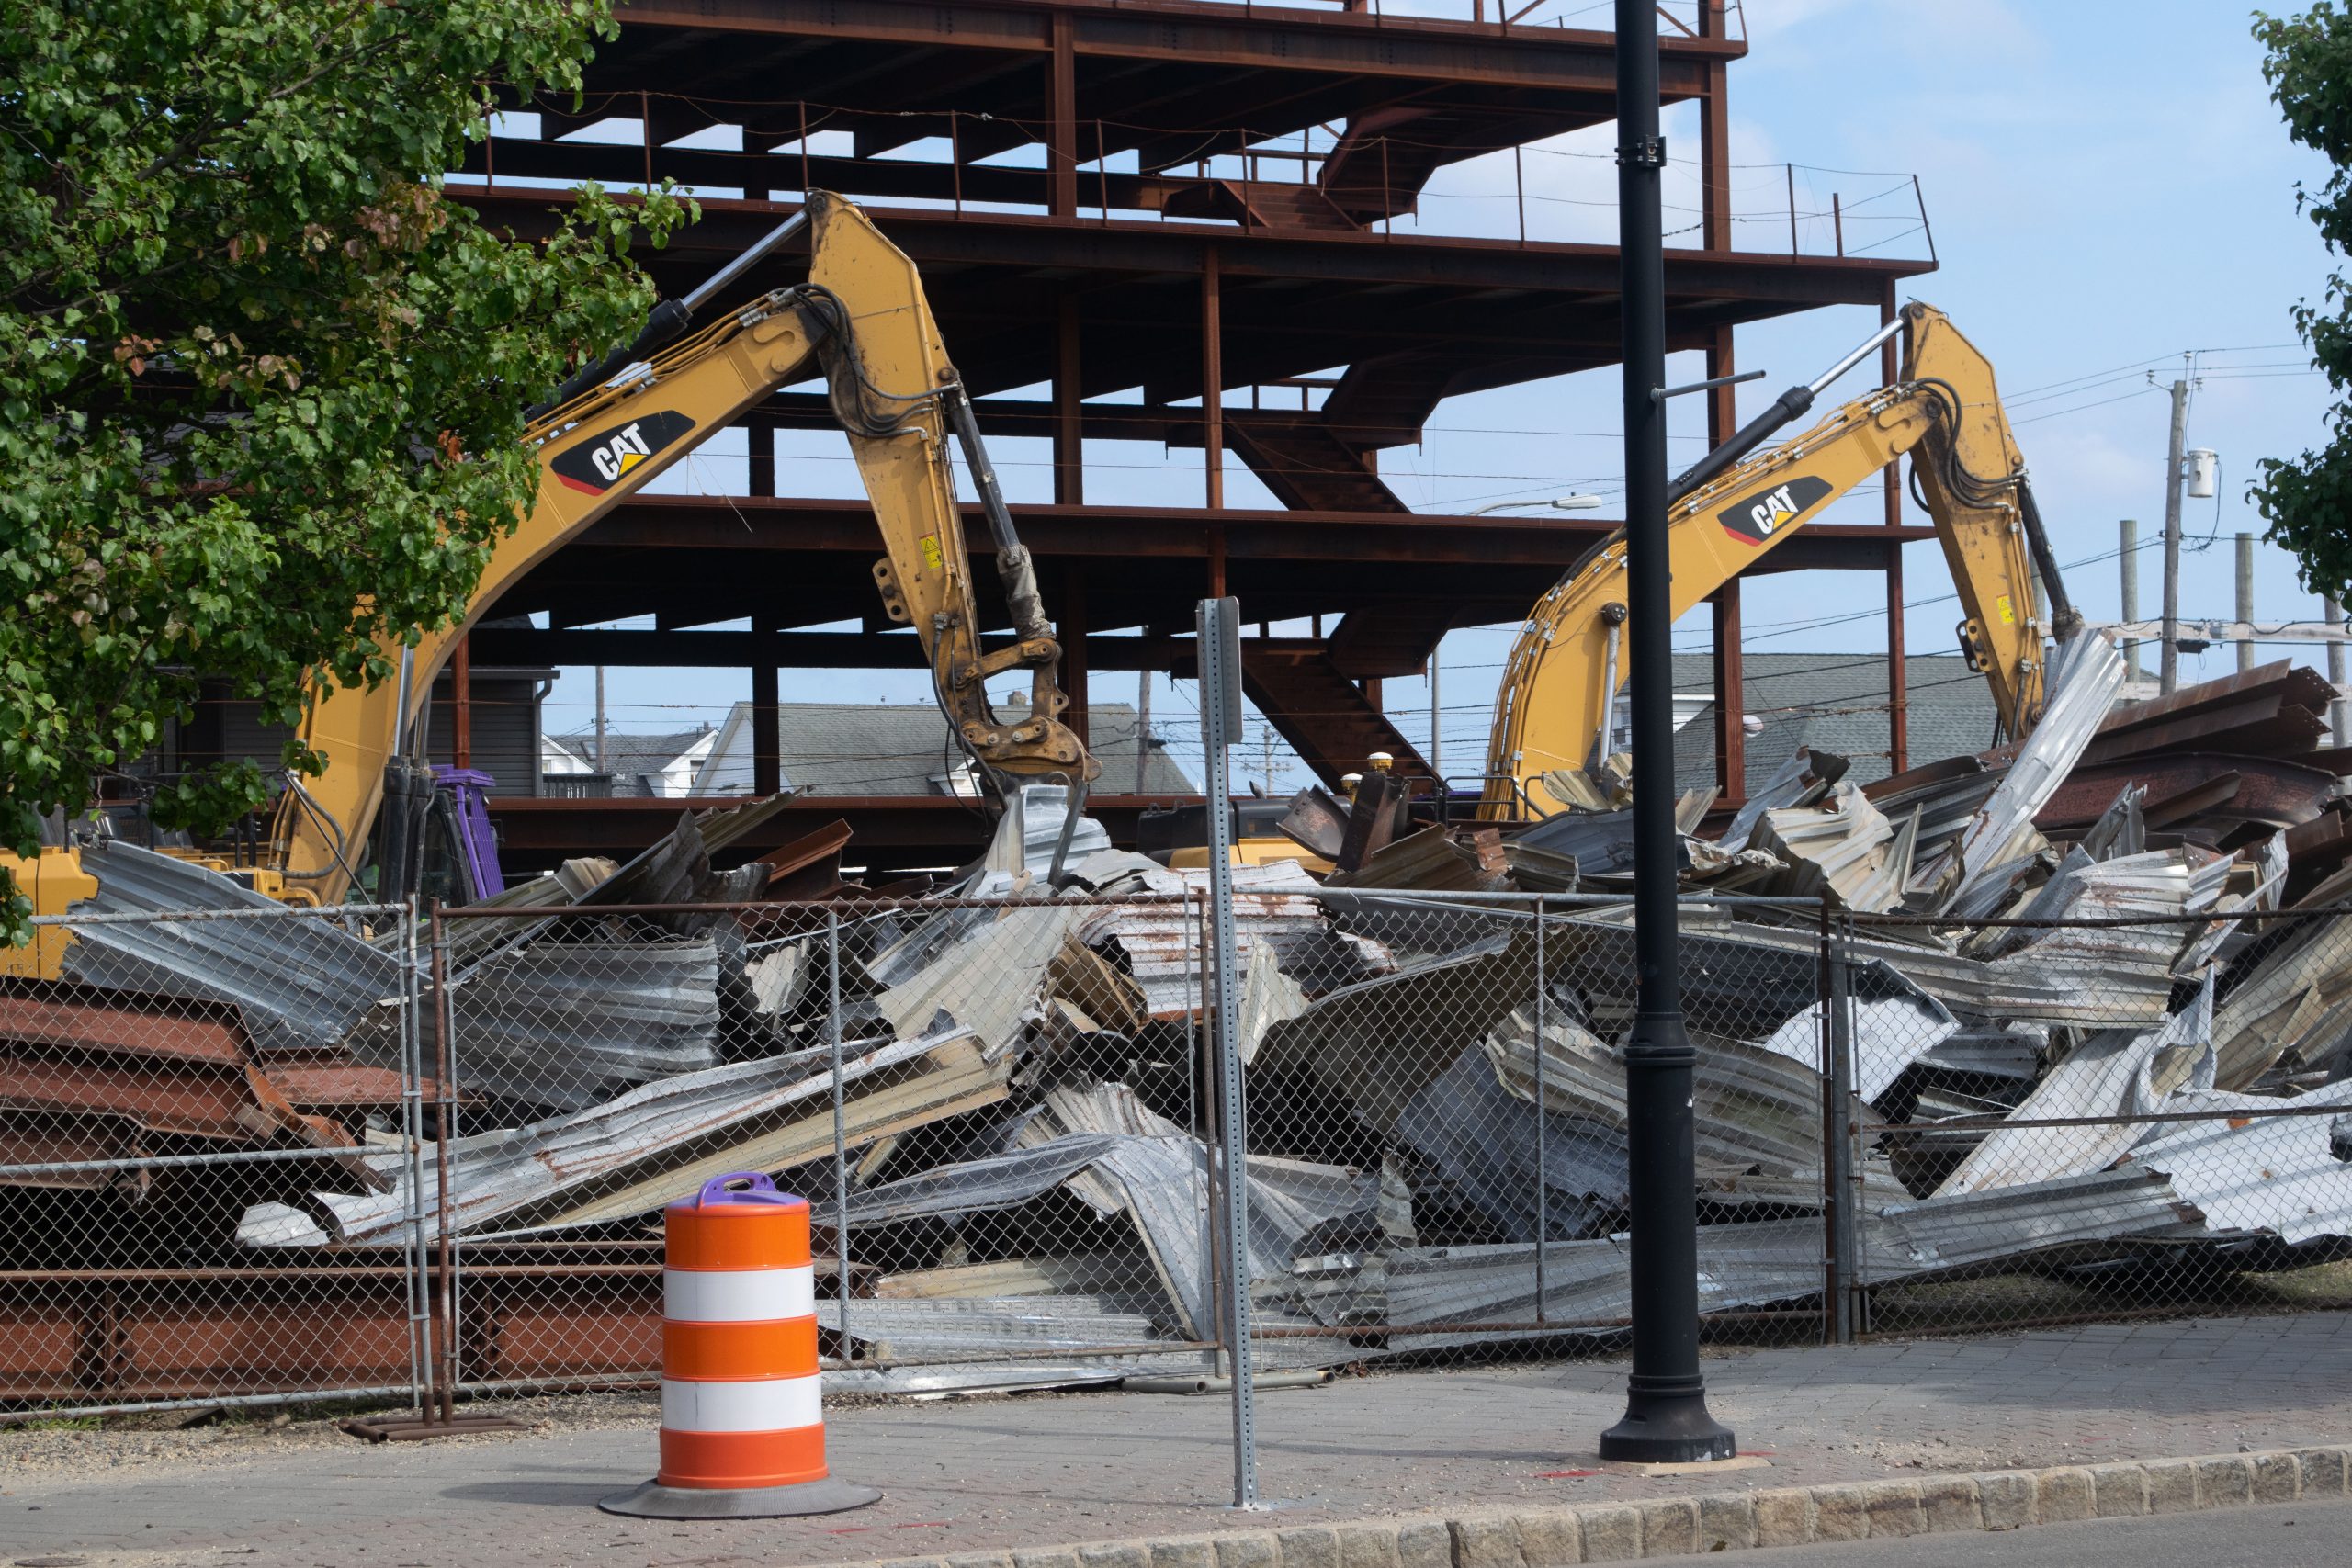 The 'steel structure' on the Boulevard in Seaside Heights is demolished, Aug. 16, 2021. (Photo: Daniel Nee)